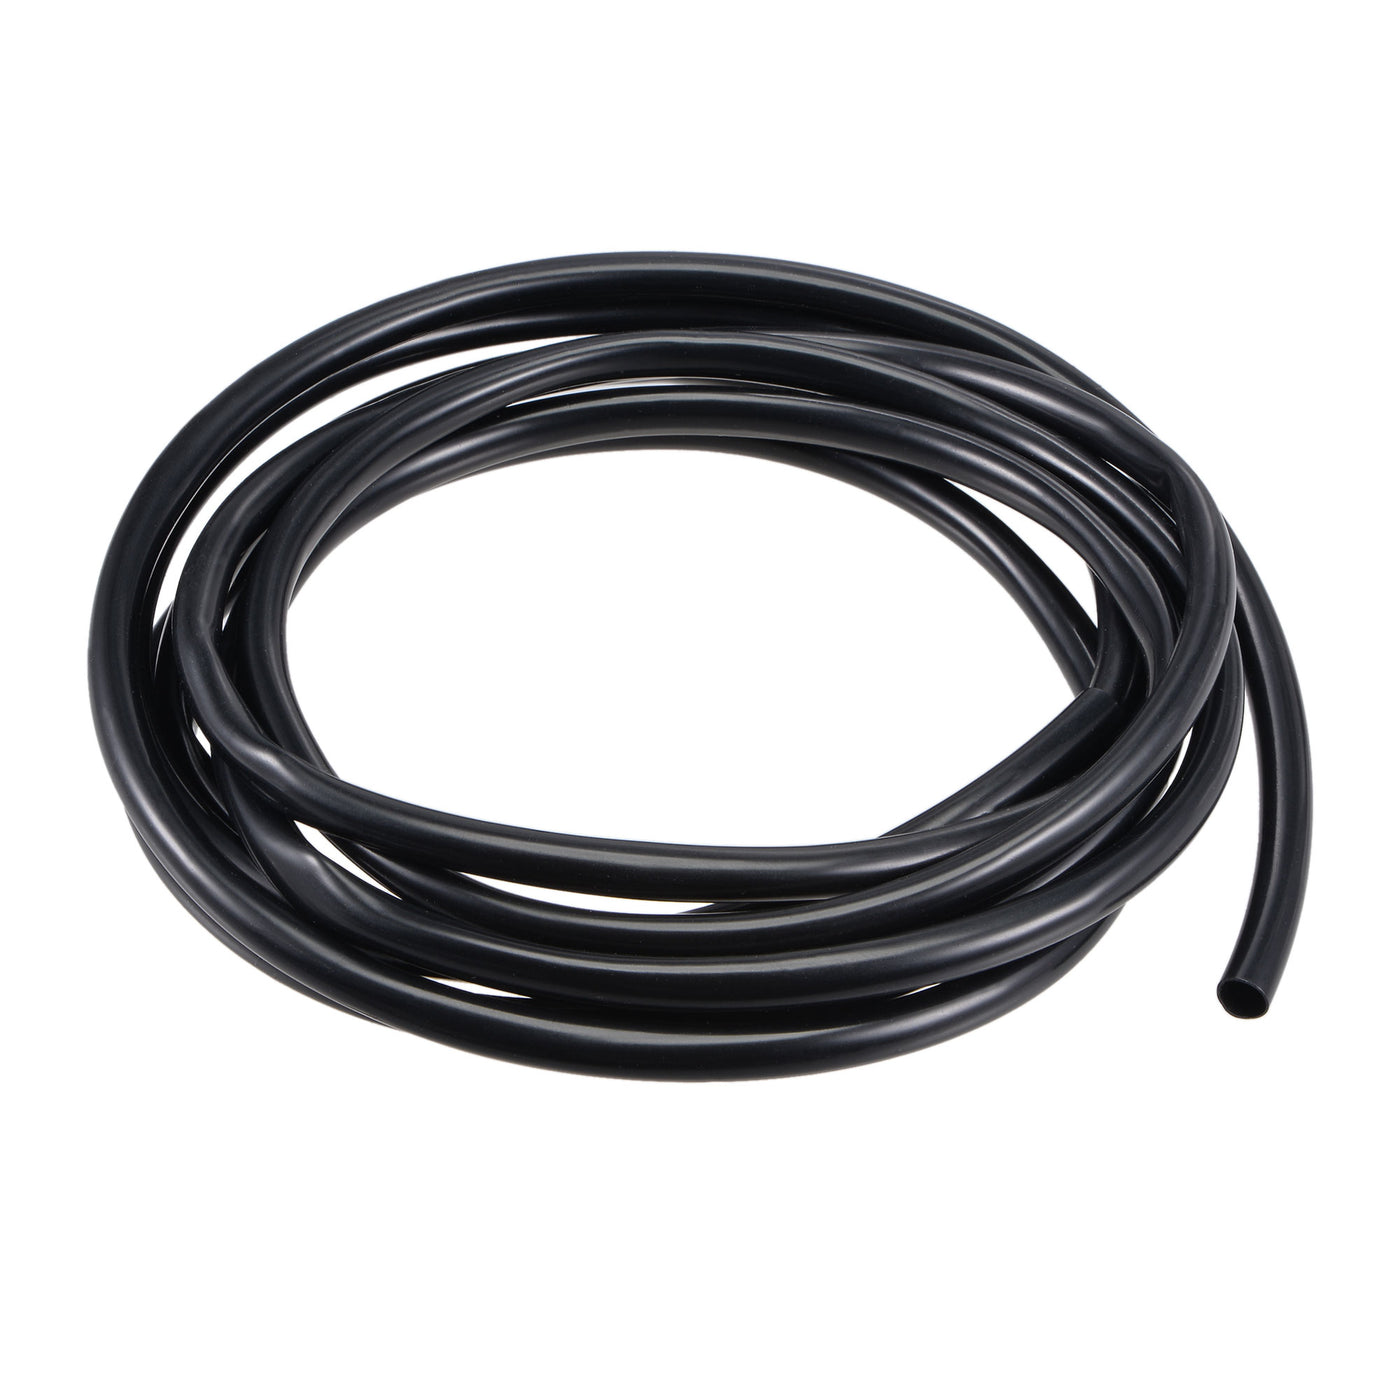 Uxcell Uxcell Black PVC Tube Wire Harness Tubing, 15mm ID 10ft Sleeve for Wire Sheathing Wire Protection